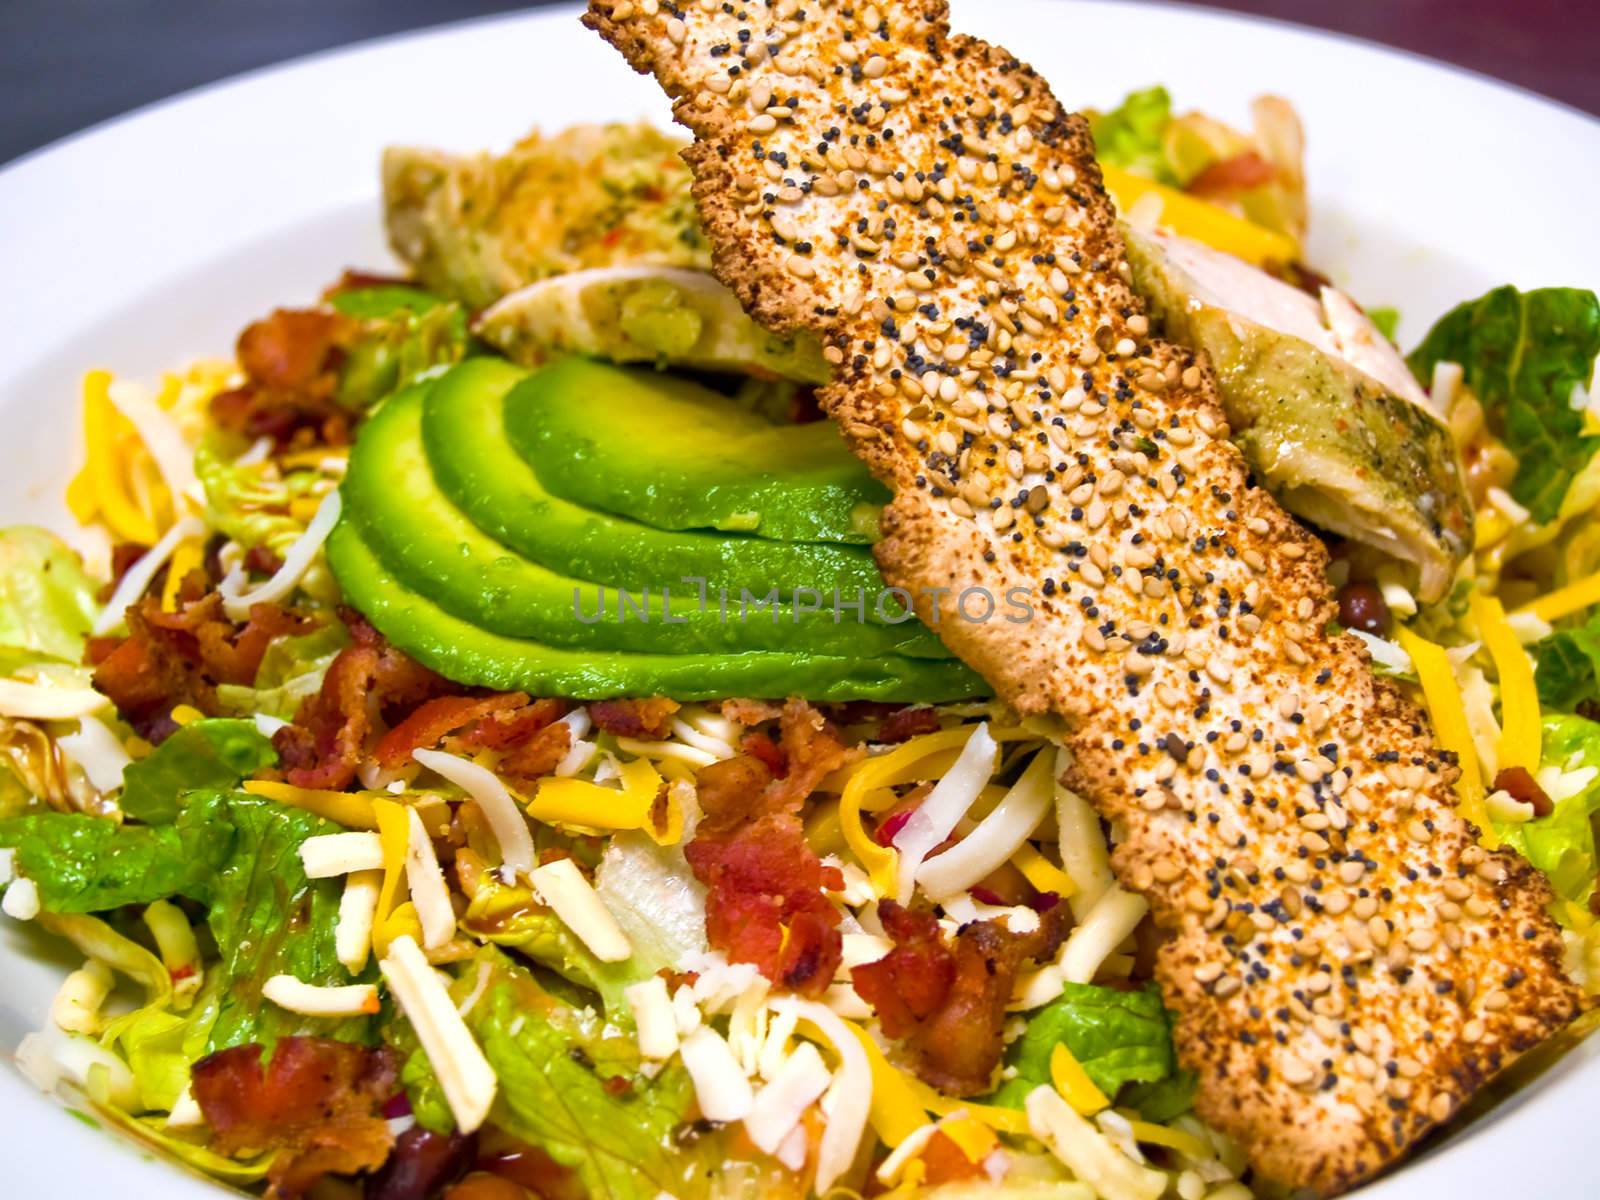 Fresh Southwestern Style Salad with Avocado Slices and Seeded Cracker